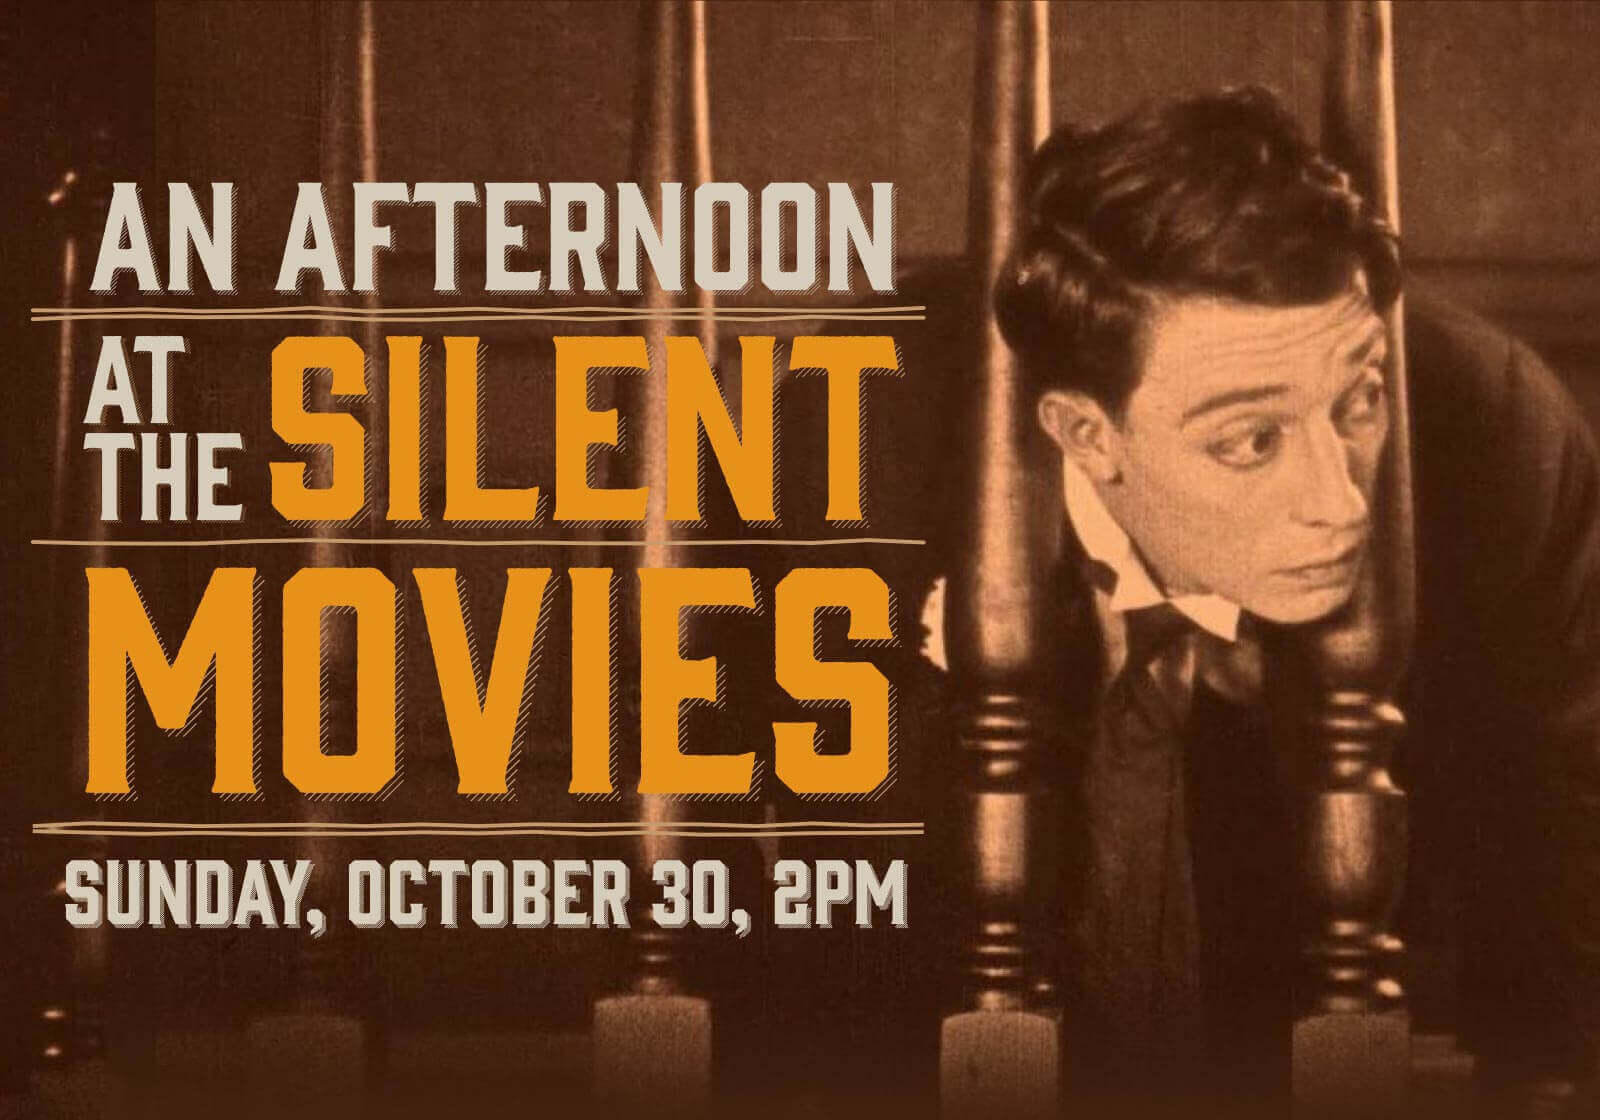 An Afternoon at the Silent Movies!